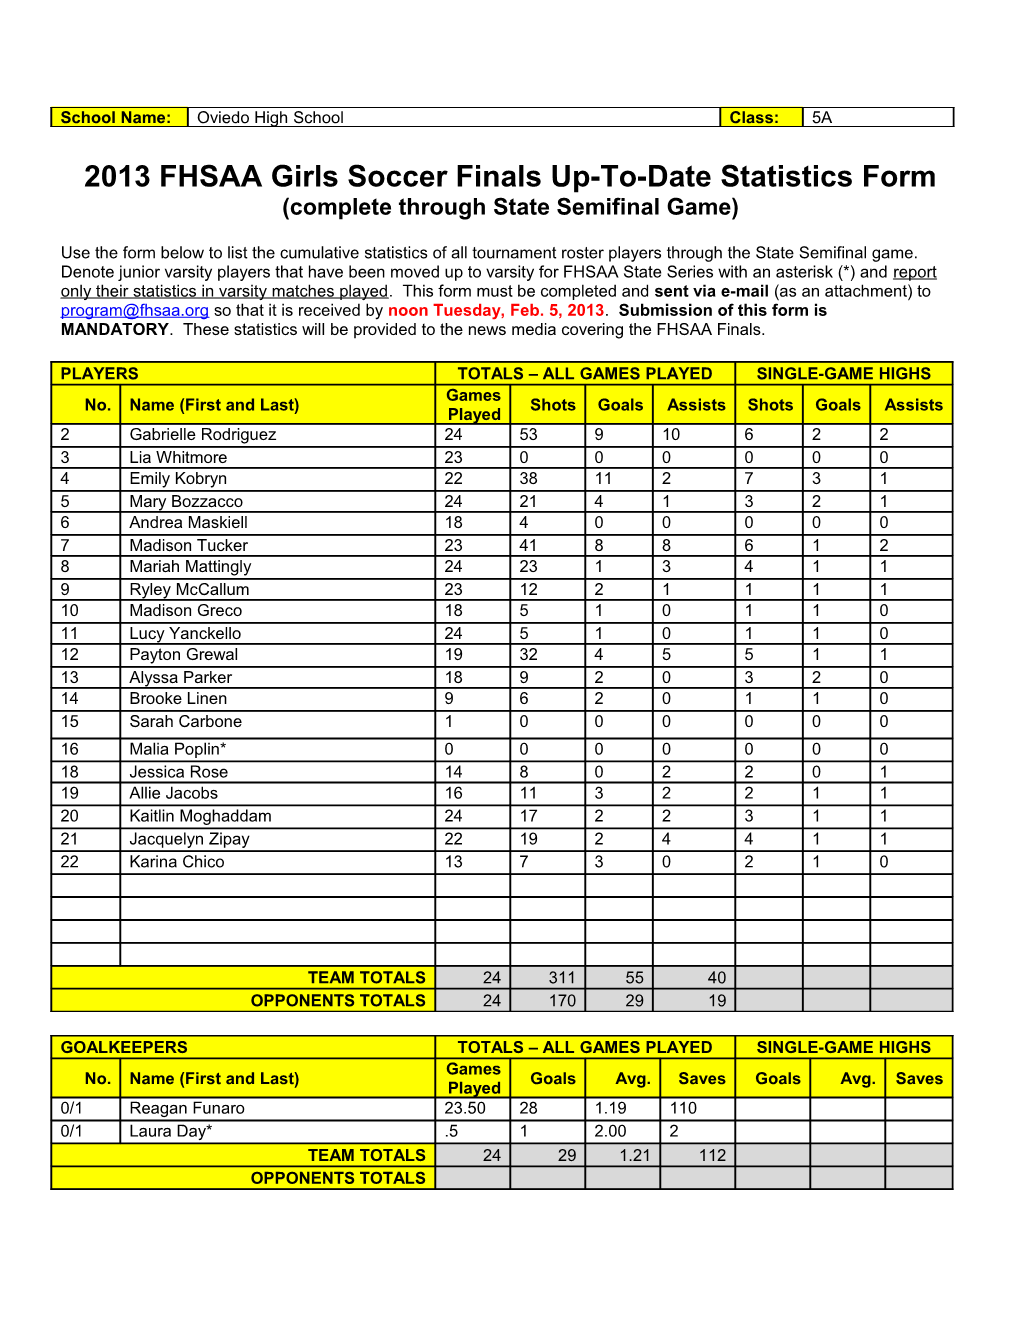 2013 FHSAA Girls Soccer Finals Up-To-Date Statistics Form